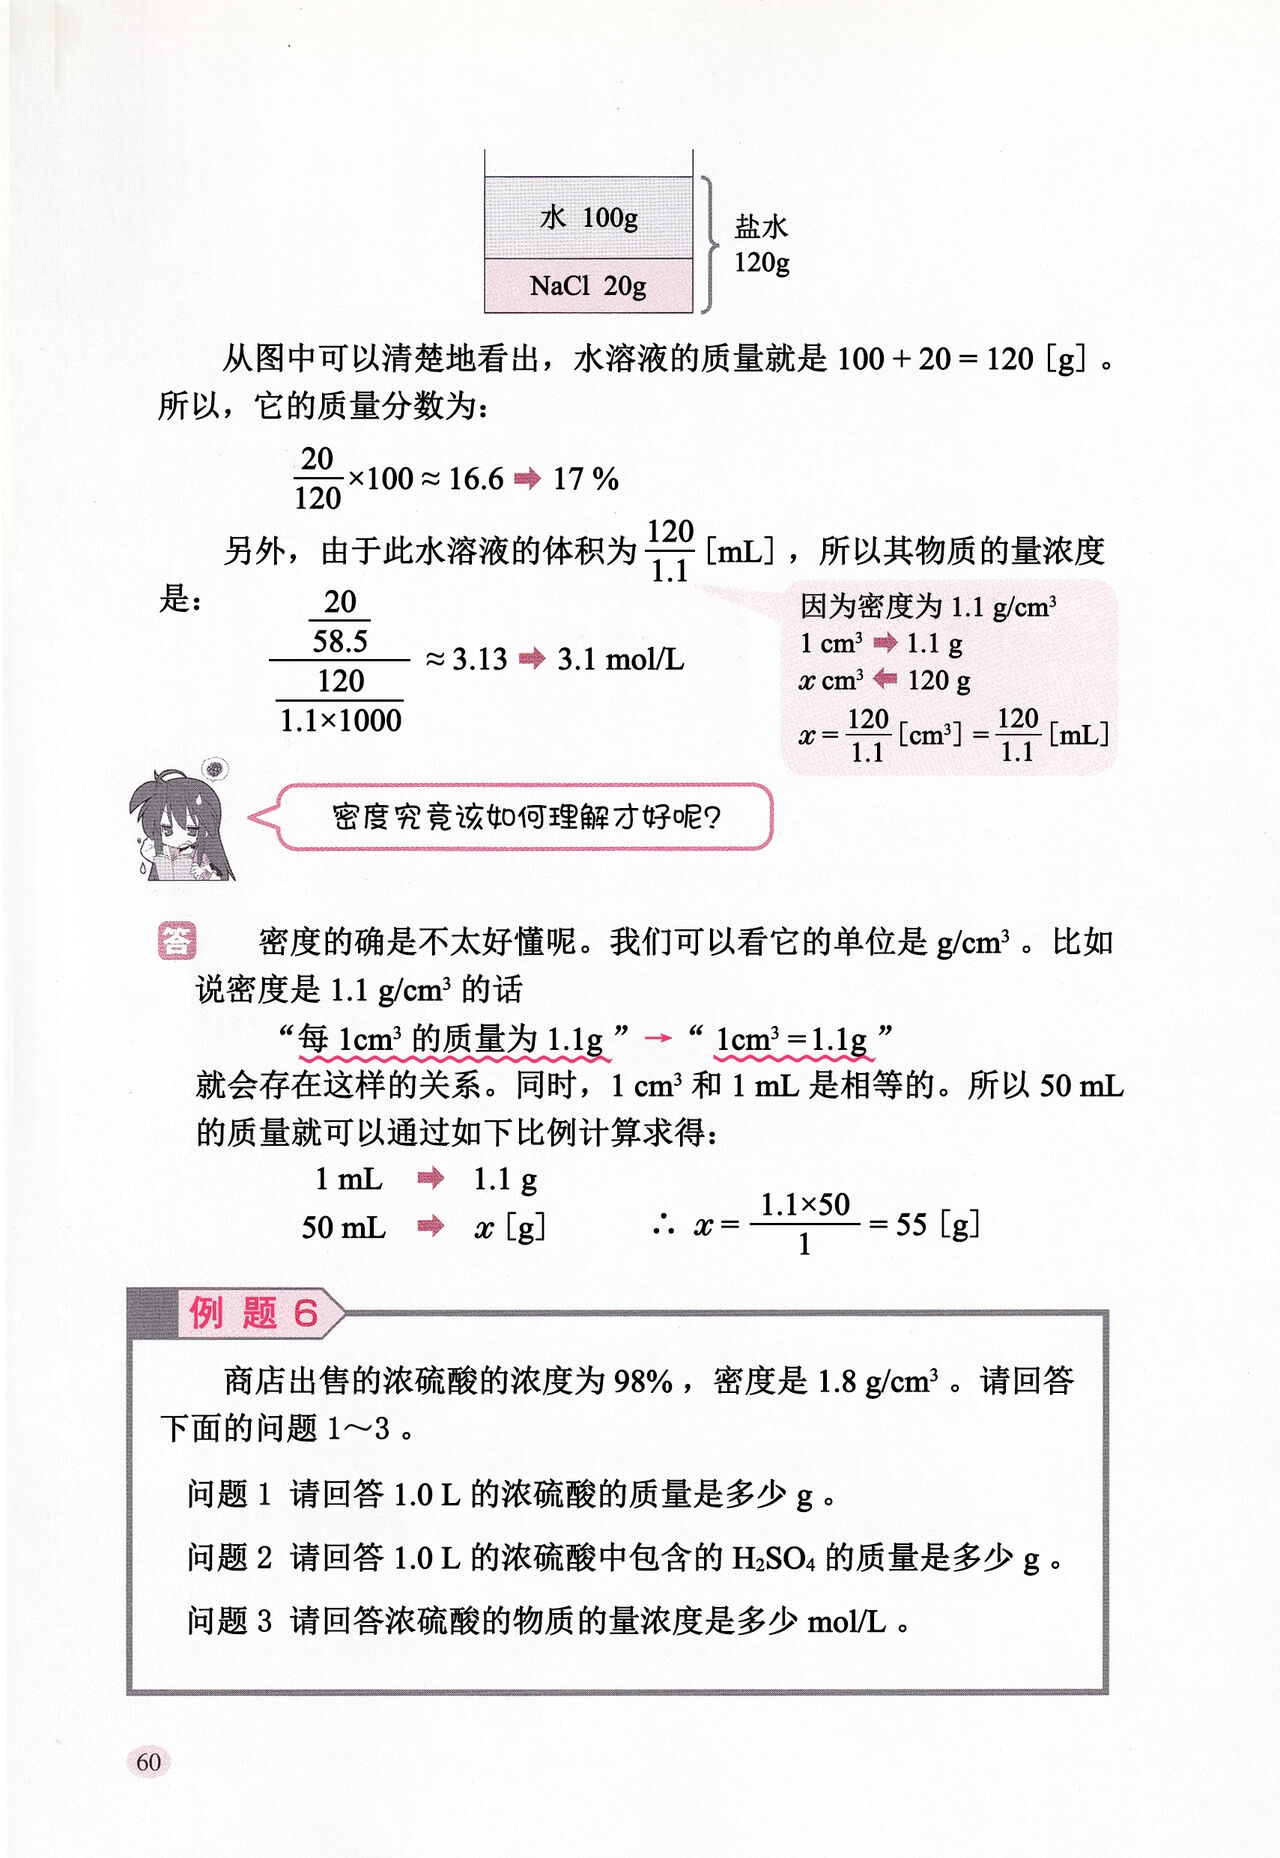 Let's Learn Chemistry with Lucky☆Star -Basic Theory- Section 1-5|和幸运星一起学化学 -理论篇- 第1-5章[Chinese][桃樹漢化組] 70